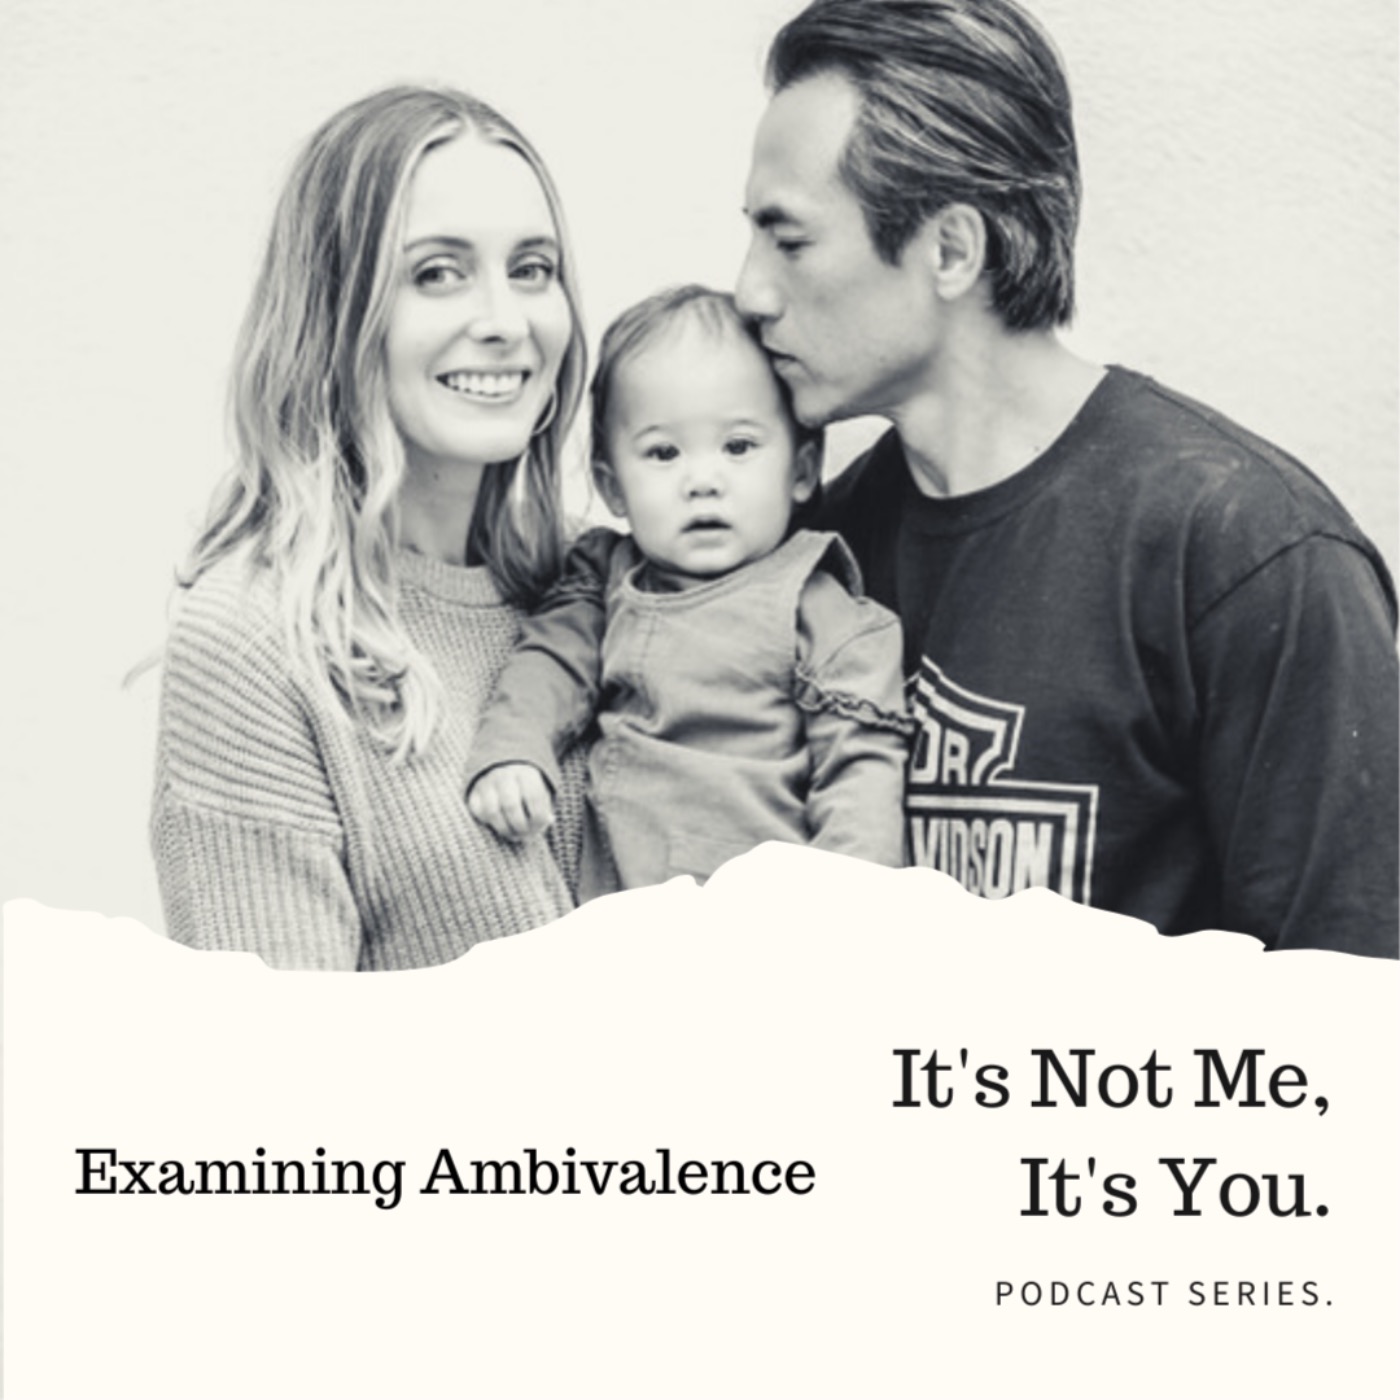 It's Not Me, It's You: Examining Ambivalence